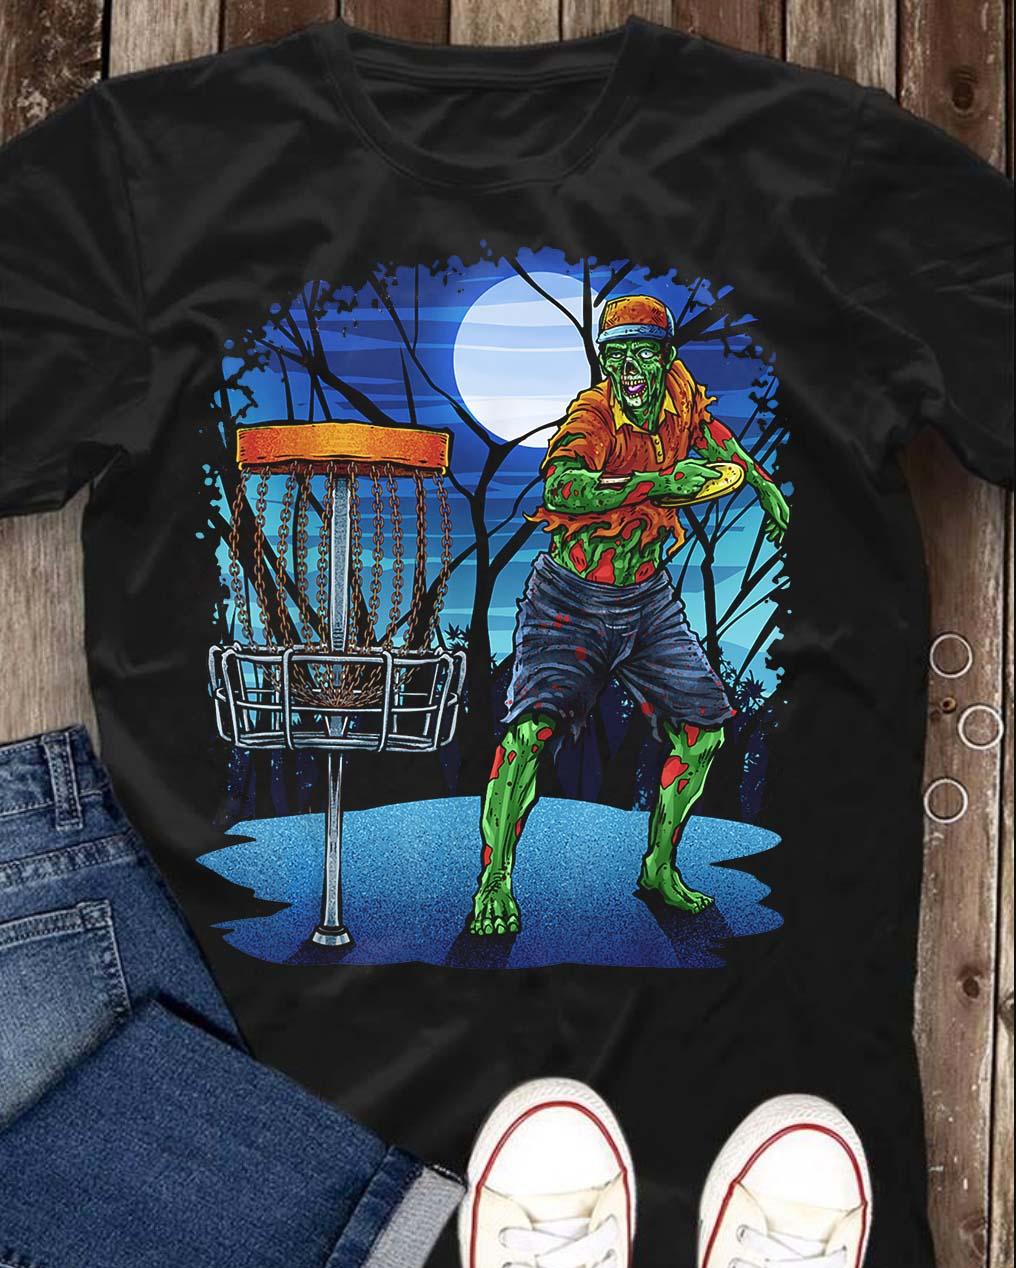 Zombie playing Disc golf - Disc golf the sport, Halloween zombie costumeZombie playing Disc golf - Disc golf the sport, Halloween zombie costume